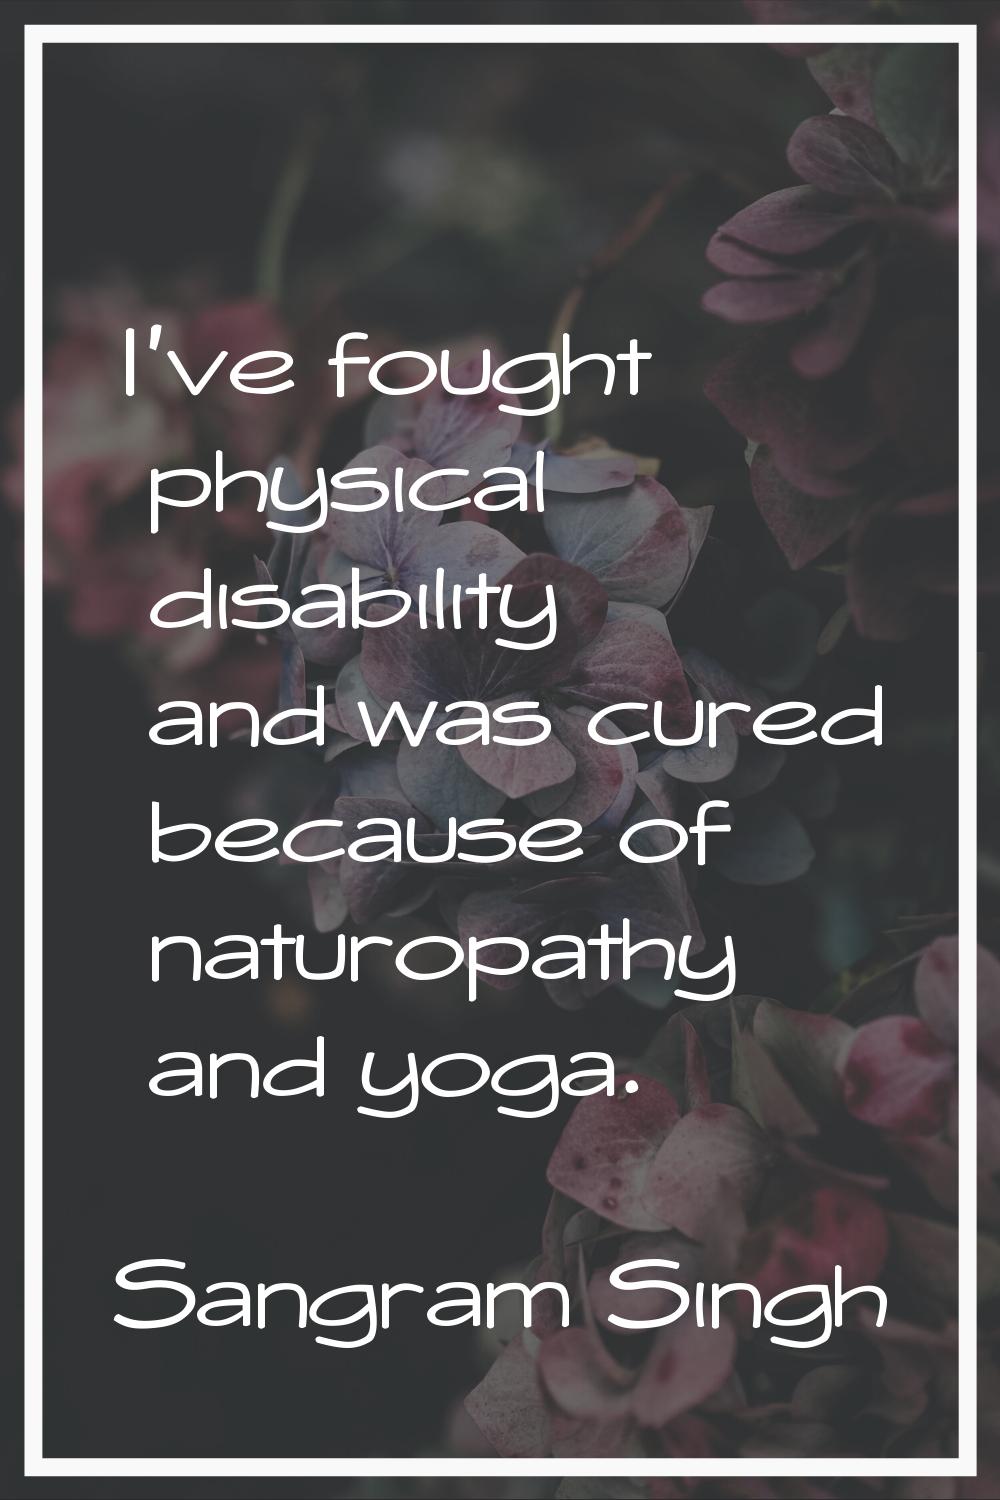 I've fought physical disability and was cured because of naturopathy and yoga.